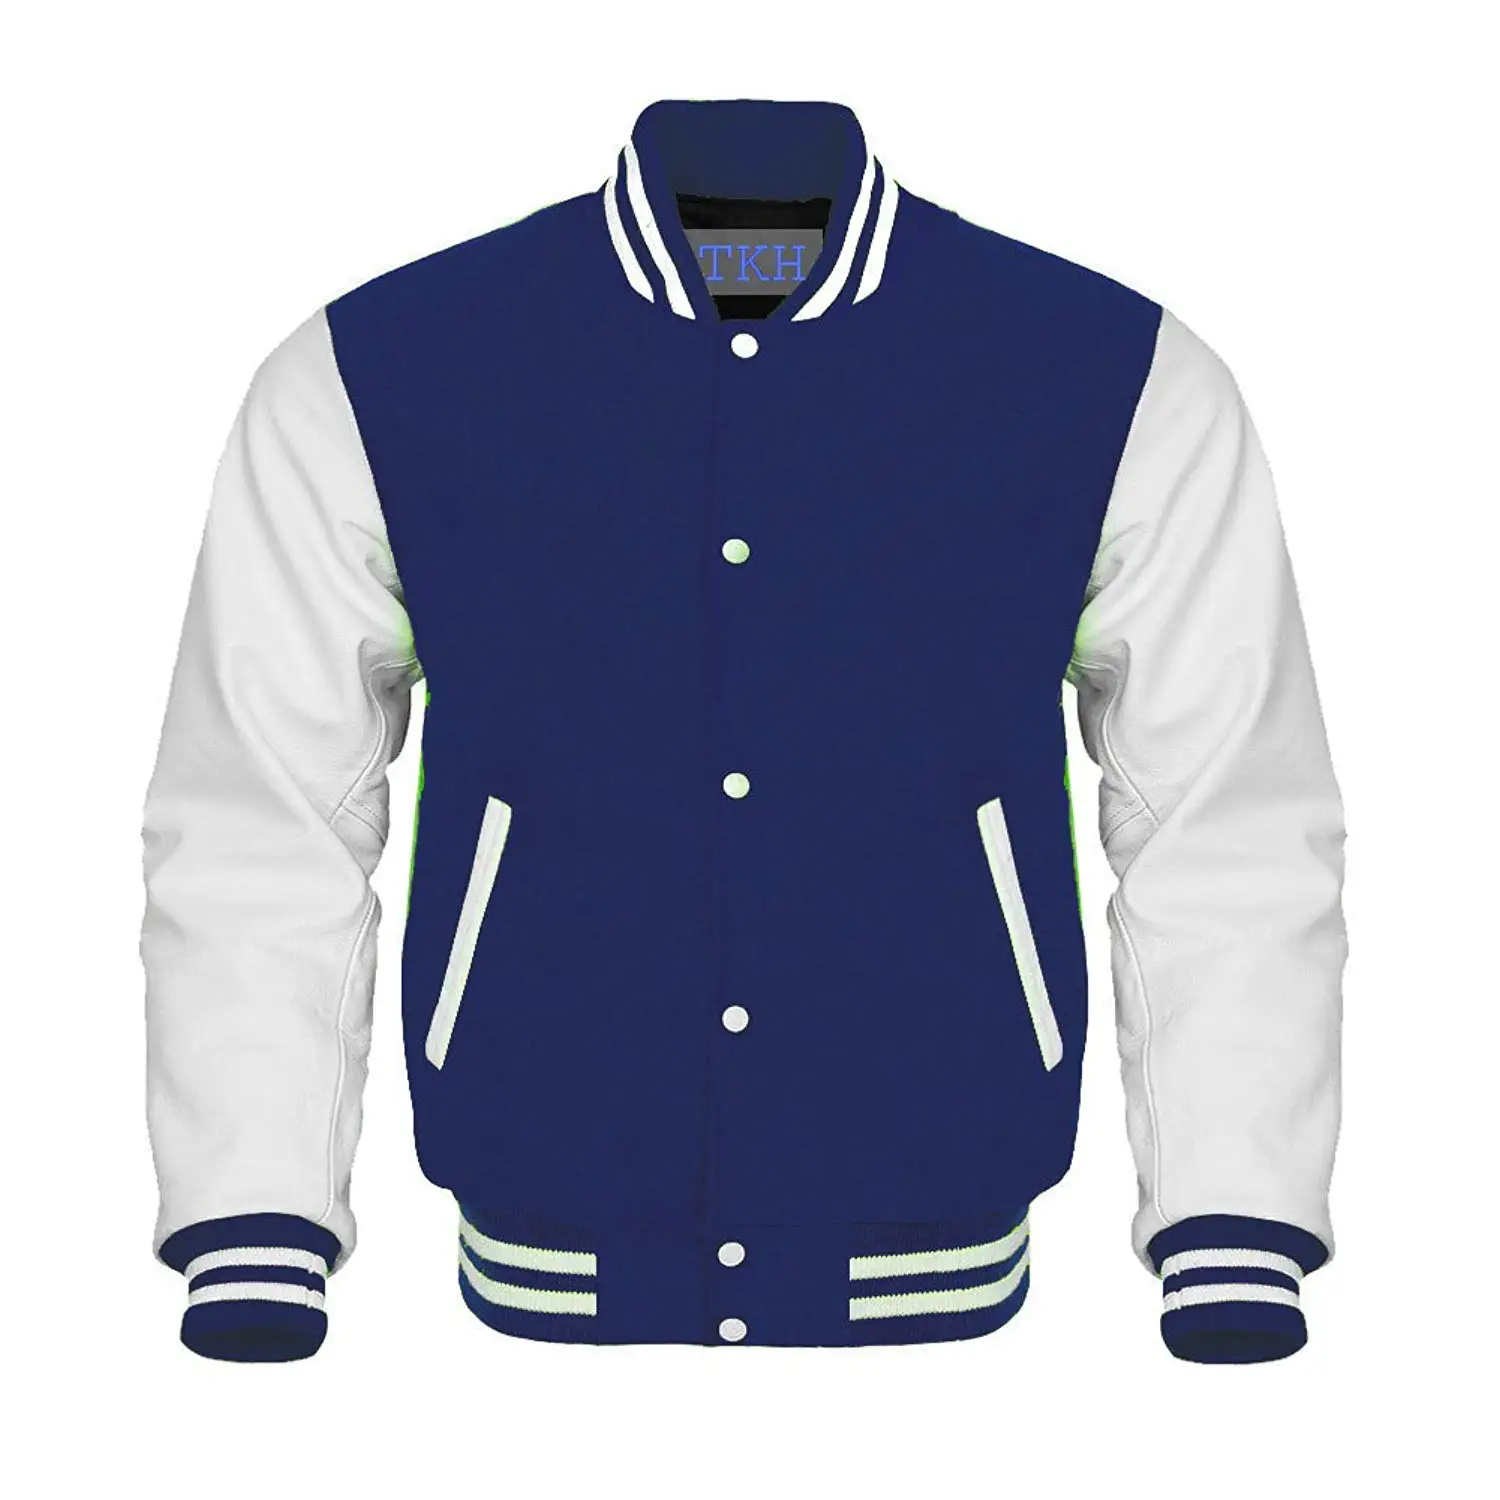 Cheap Baseball Jacket Blue And White, find Baseball Jacket Blue And ...